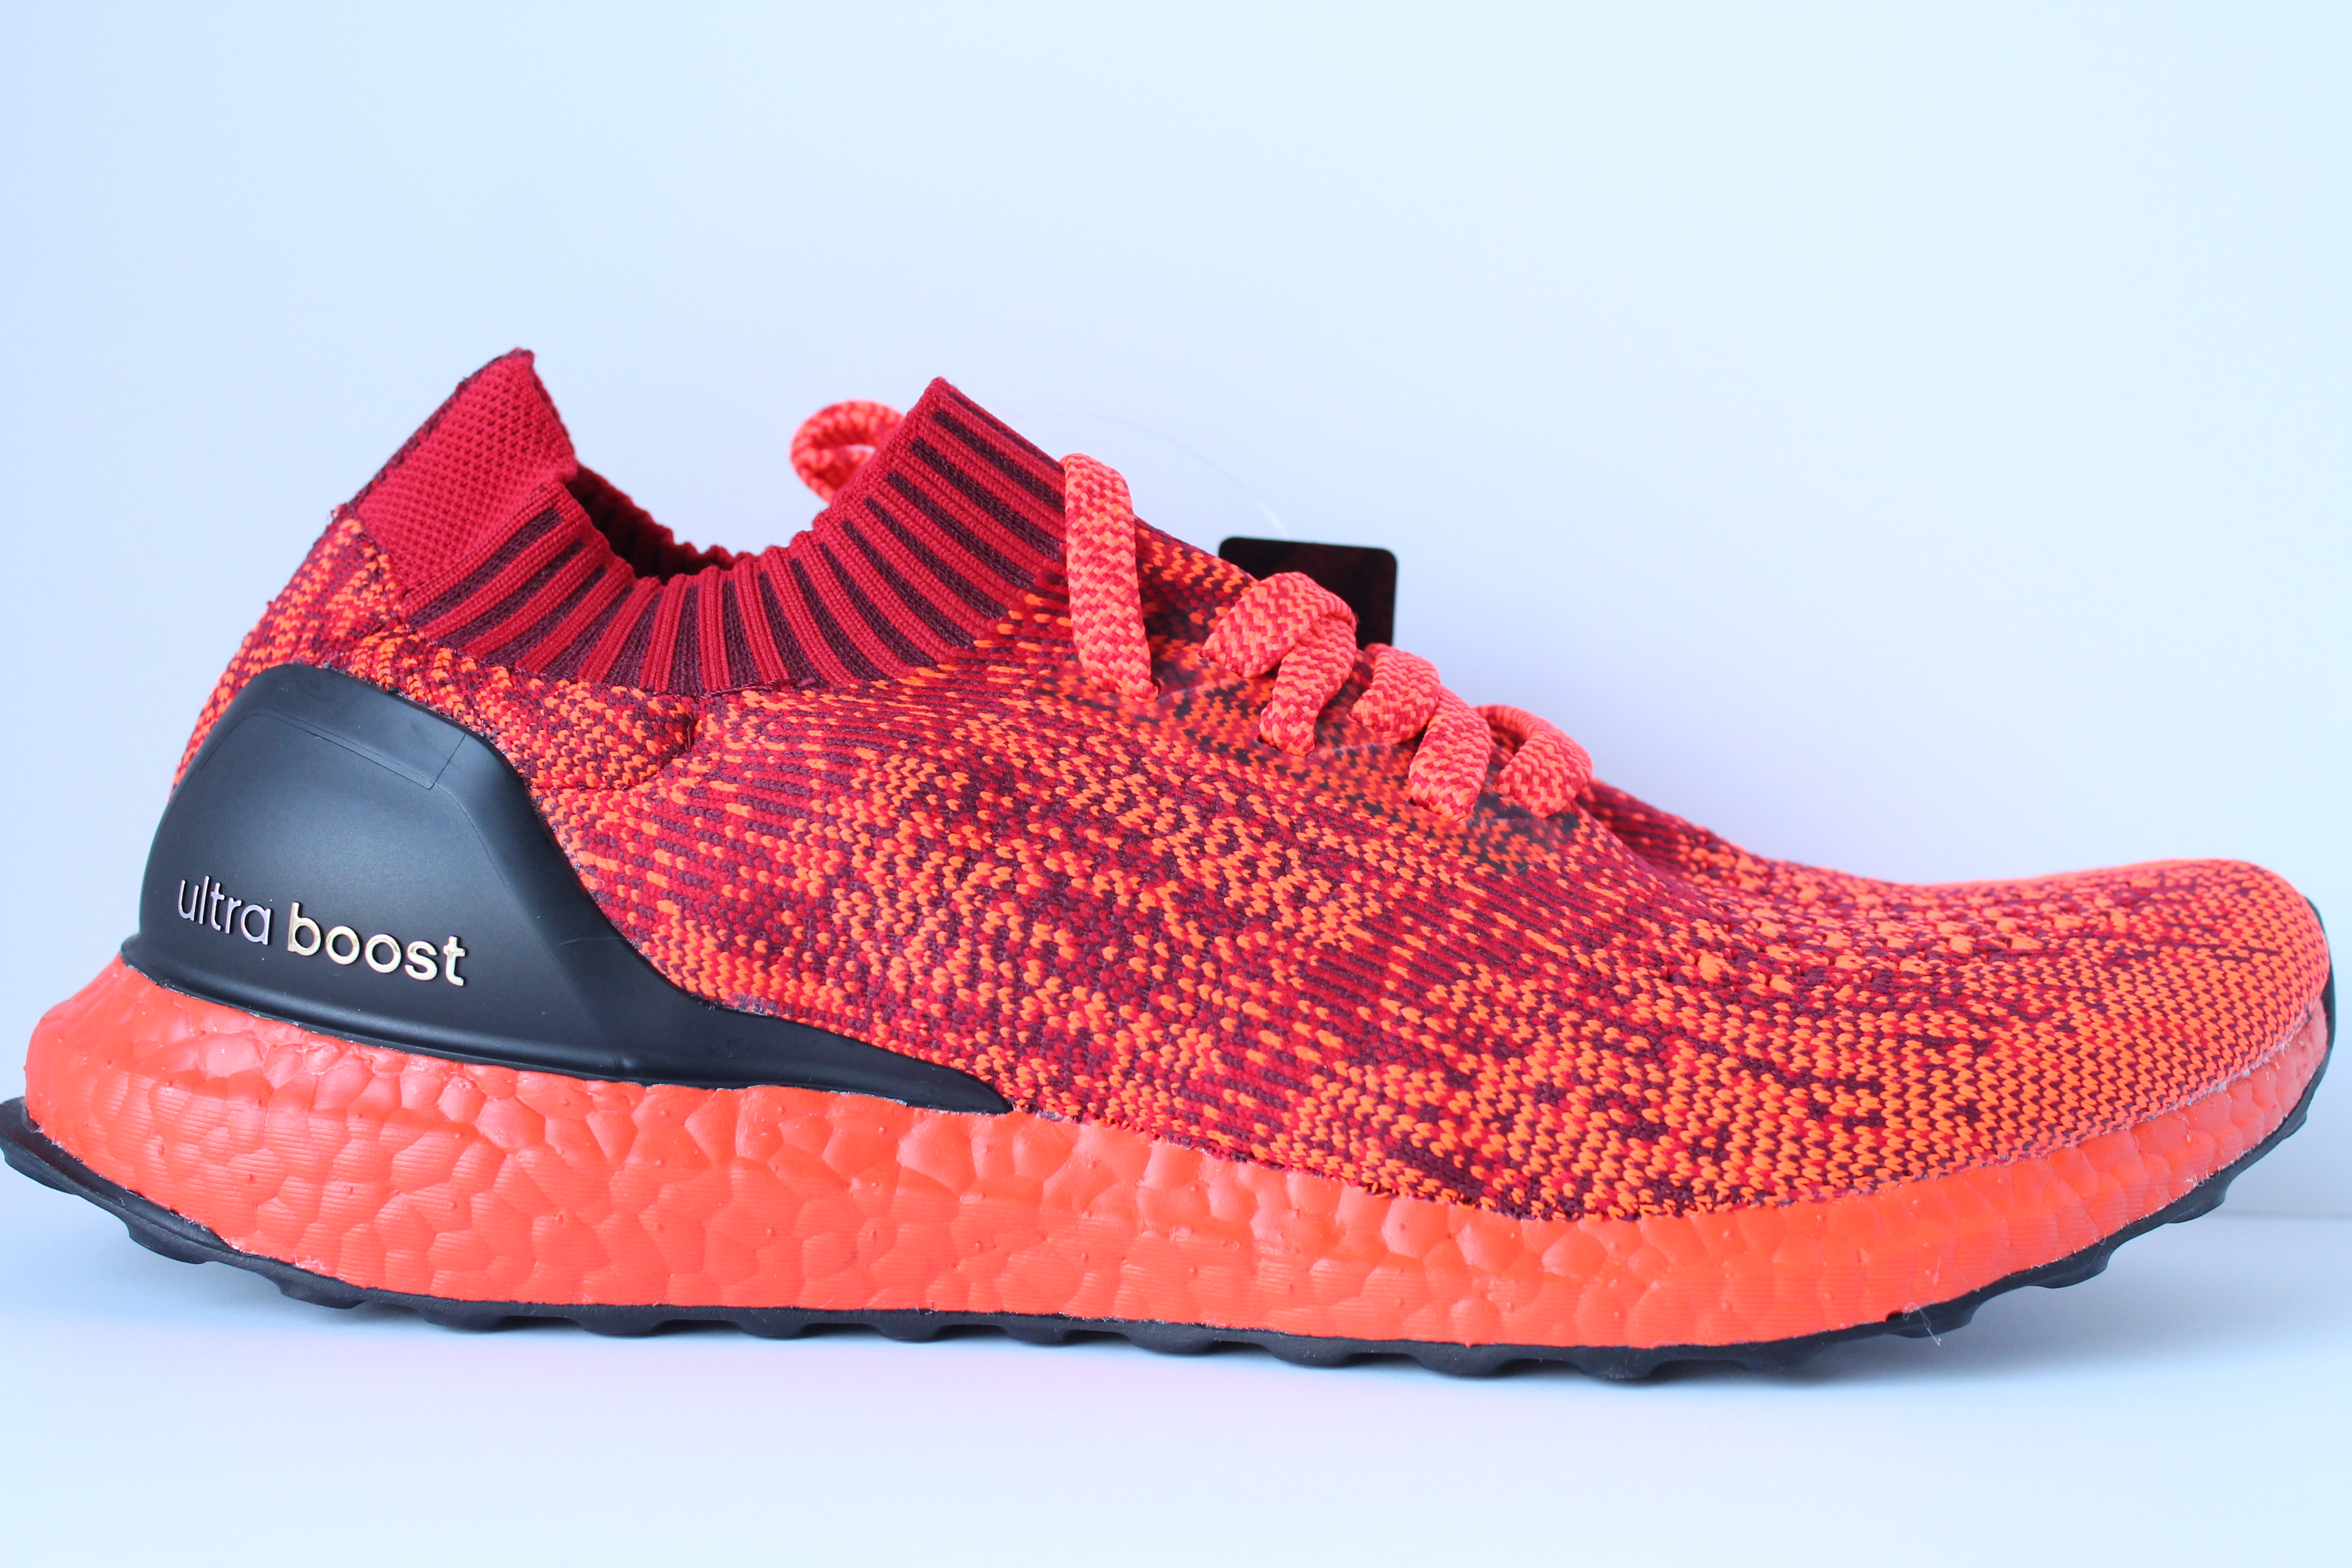 Adidas Ultra Boost Uncaged LTD Colored Boost – Red